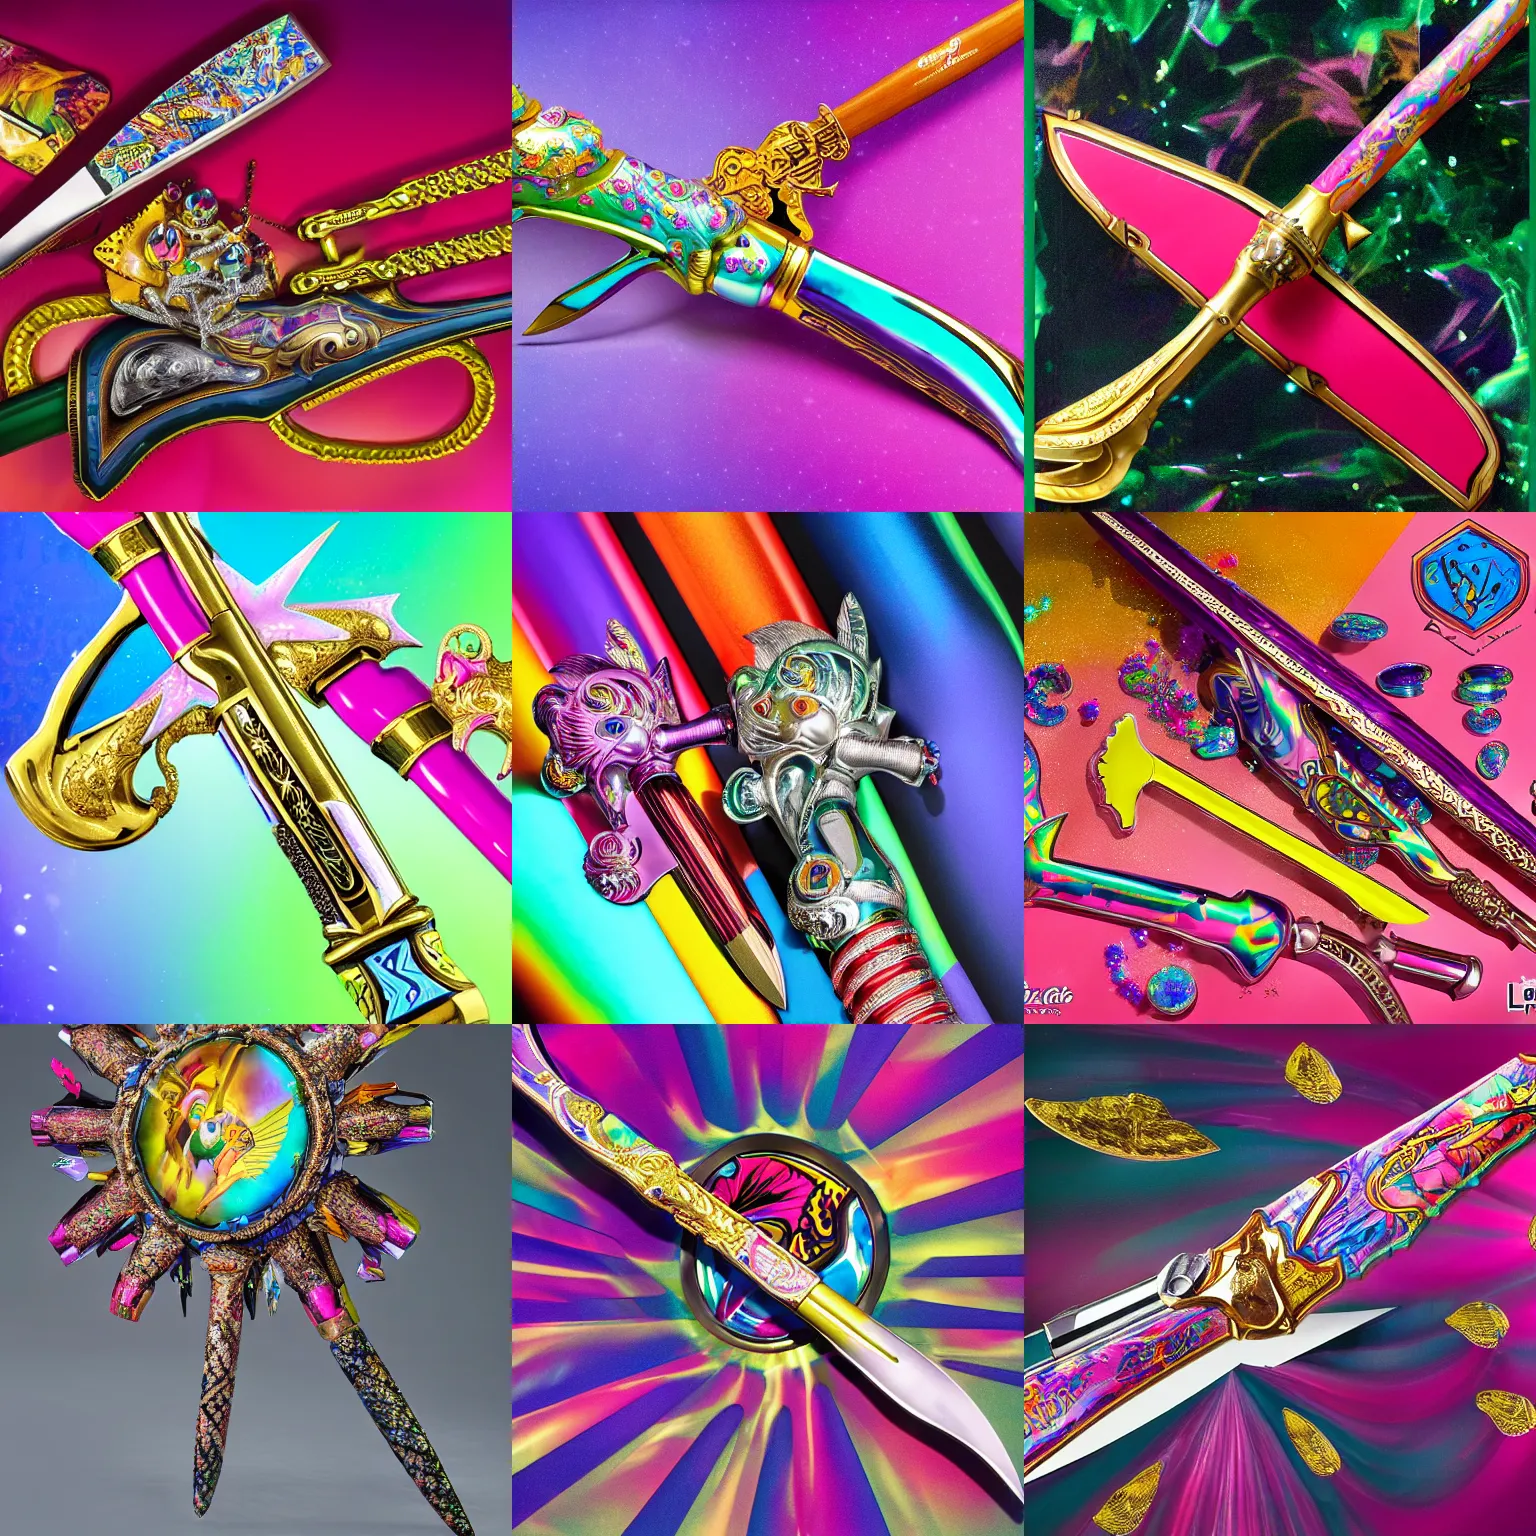 Prompt: legendary melee weapon designed by Lisa Frank in collaboration with The House of Fabergé, high resolution auction photo